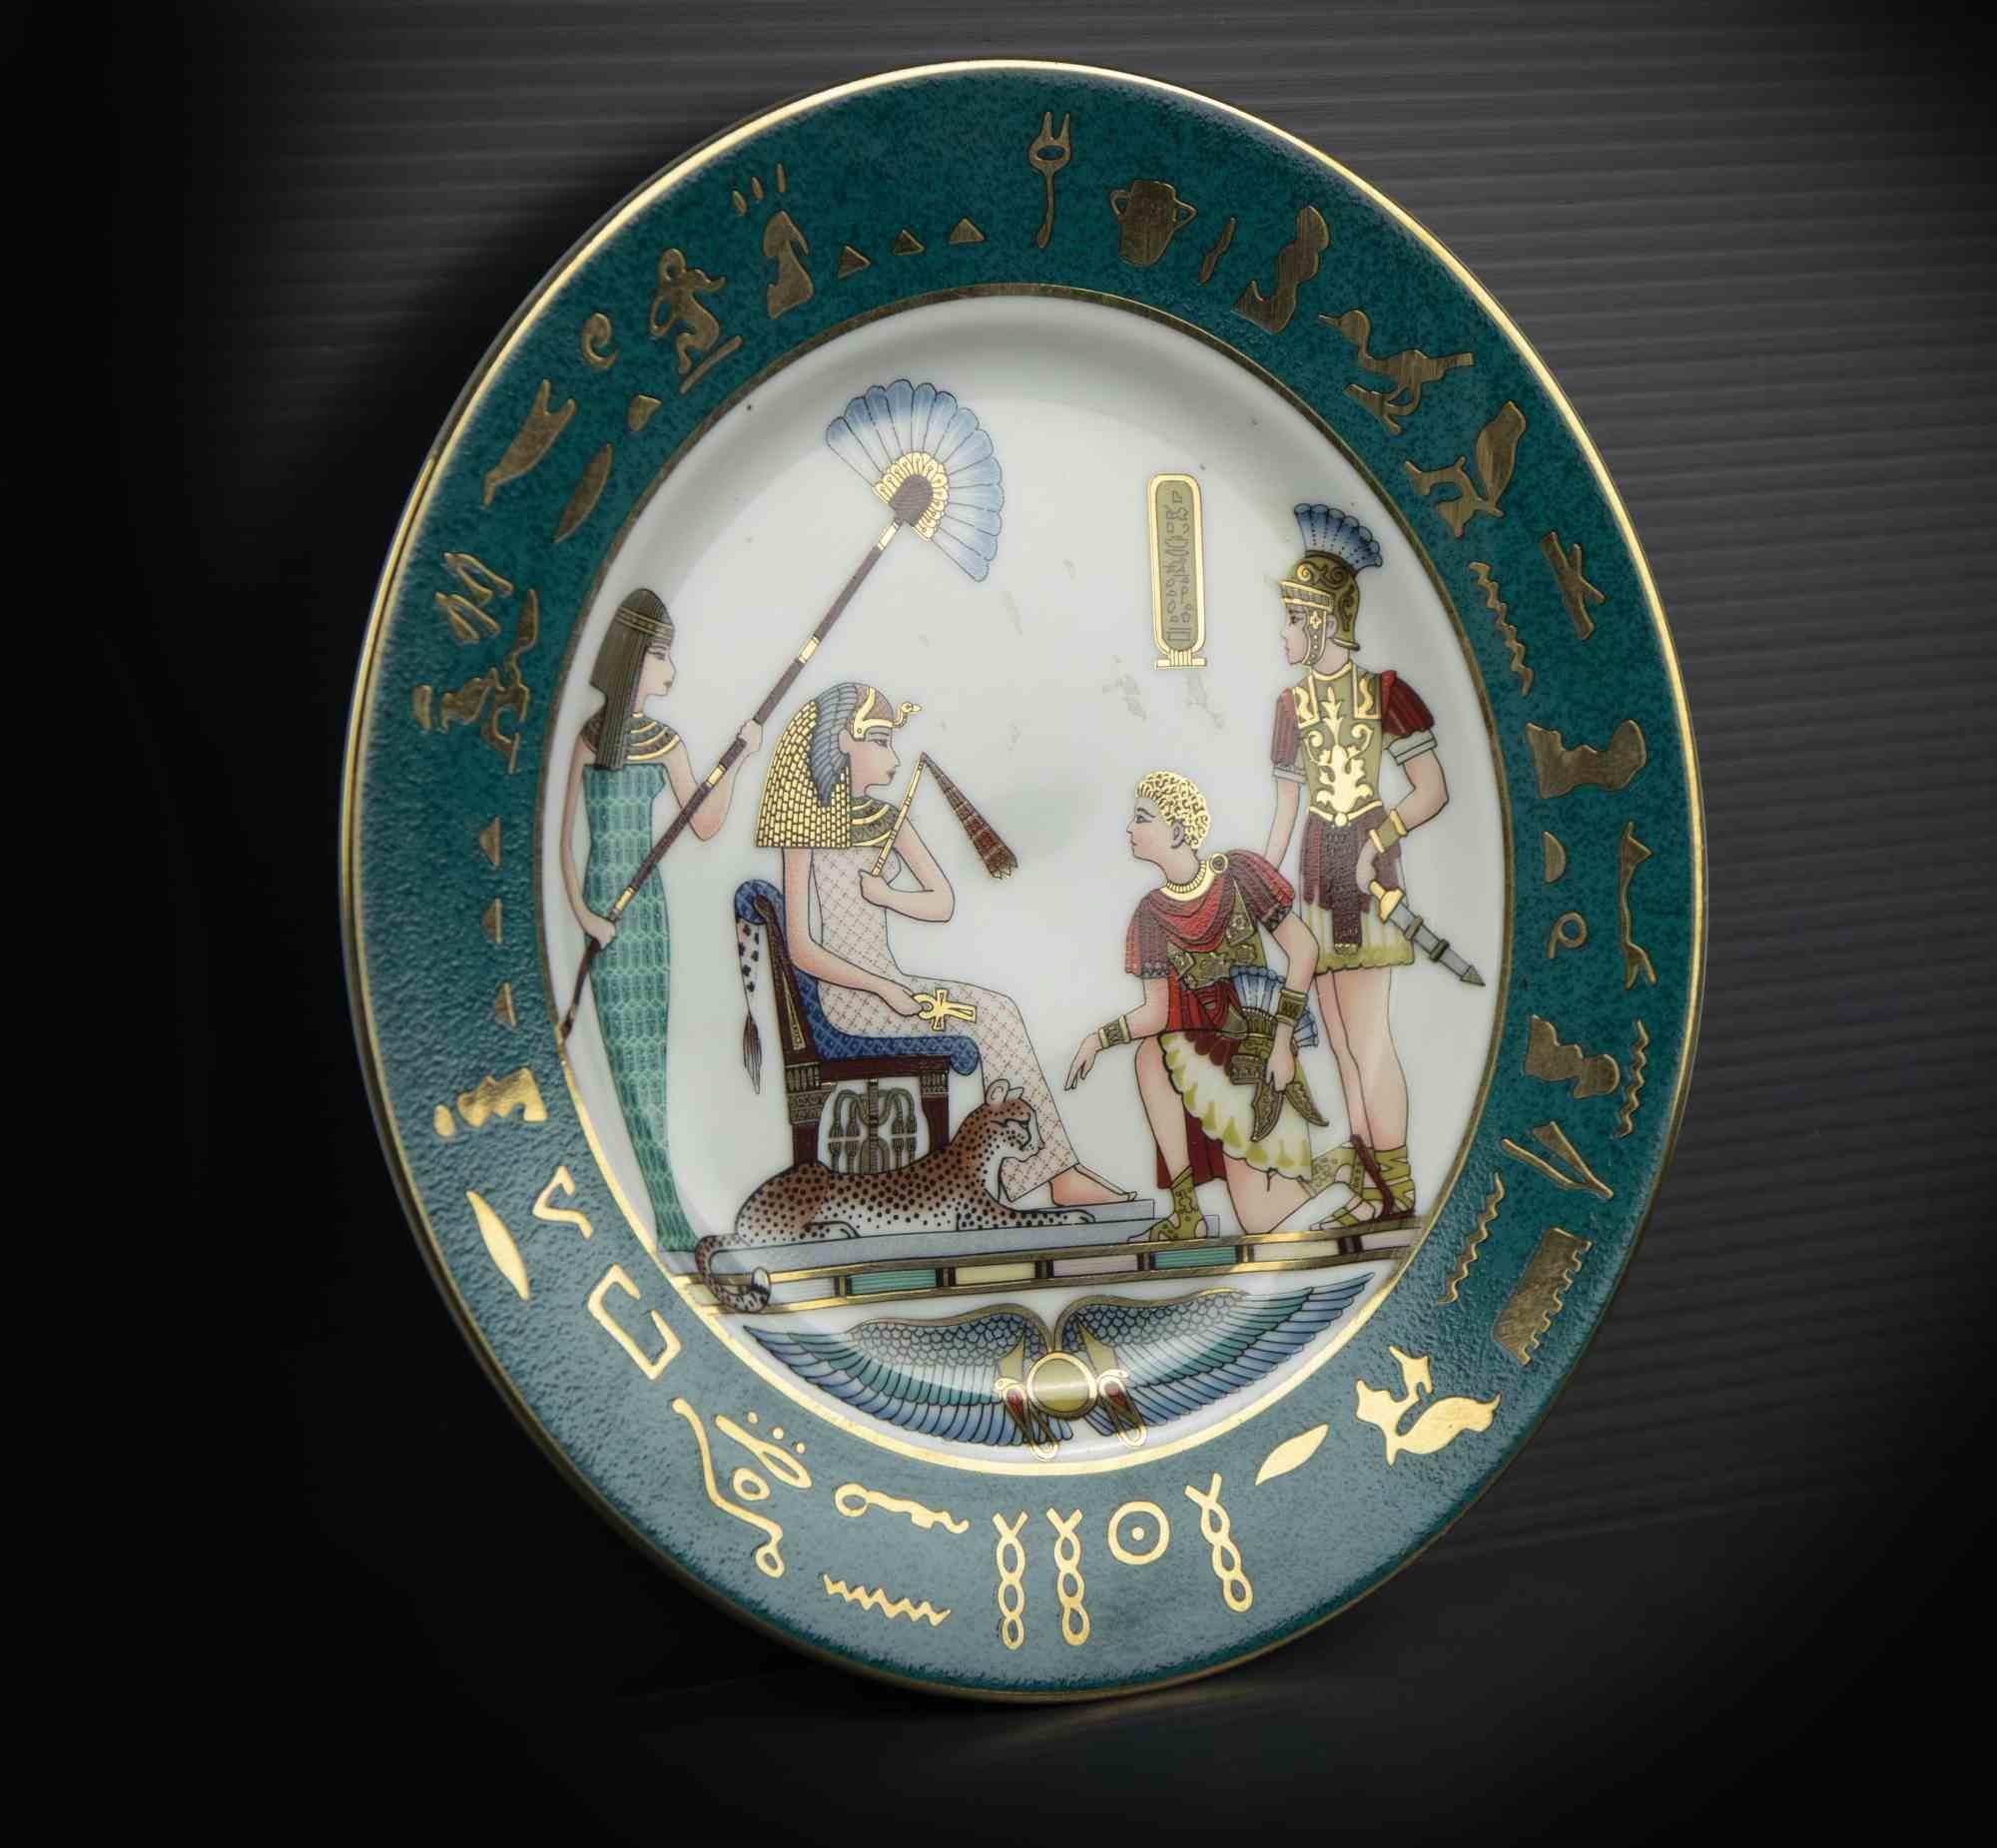 Vintage pair of plates with Egyptian Motives is a beautiful plates set realized in the 1960s.

Pair of porcelain plates decorated with Egyptian motifs and gilded decorations.

Marked under the base 